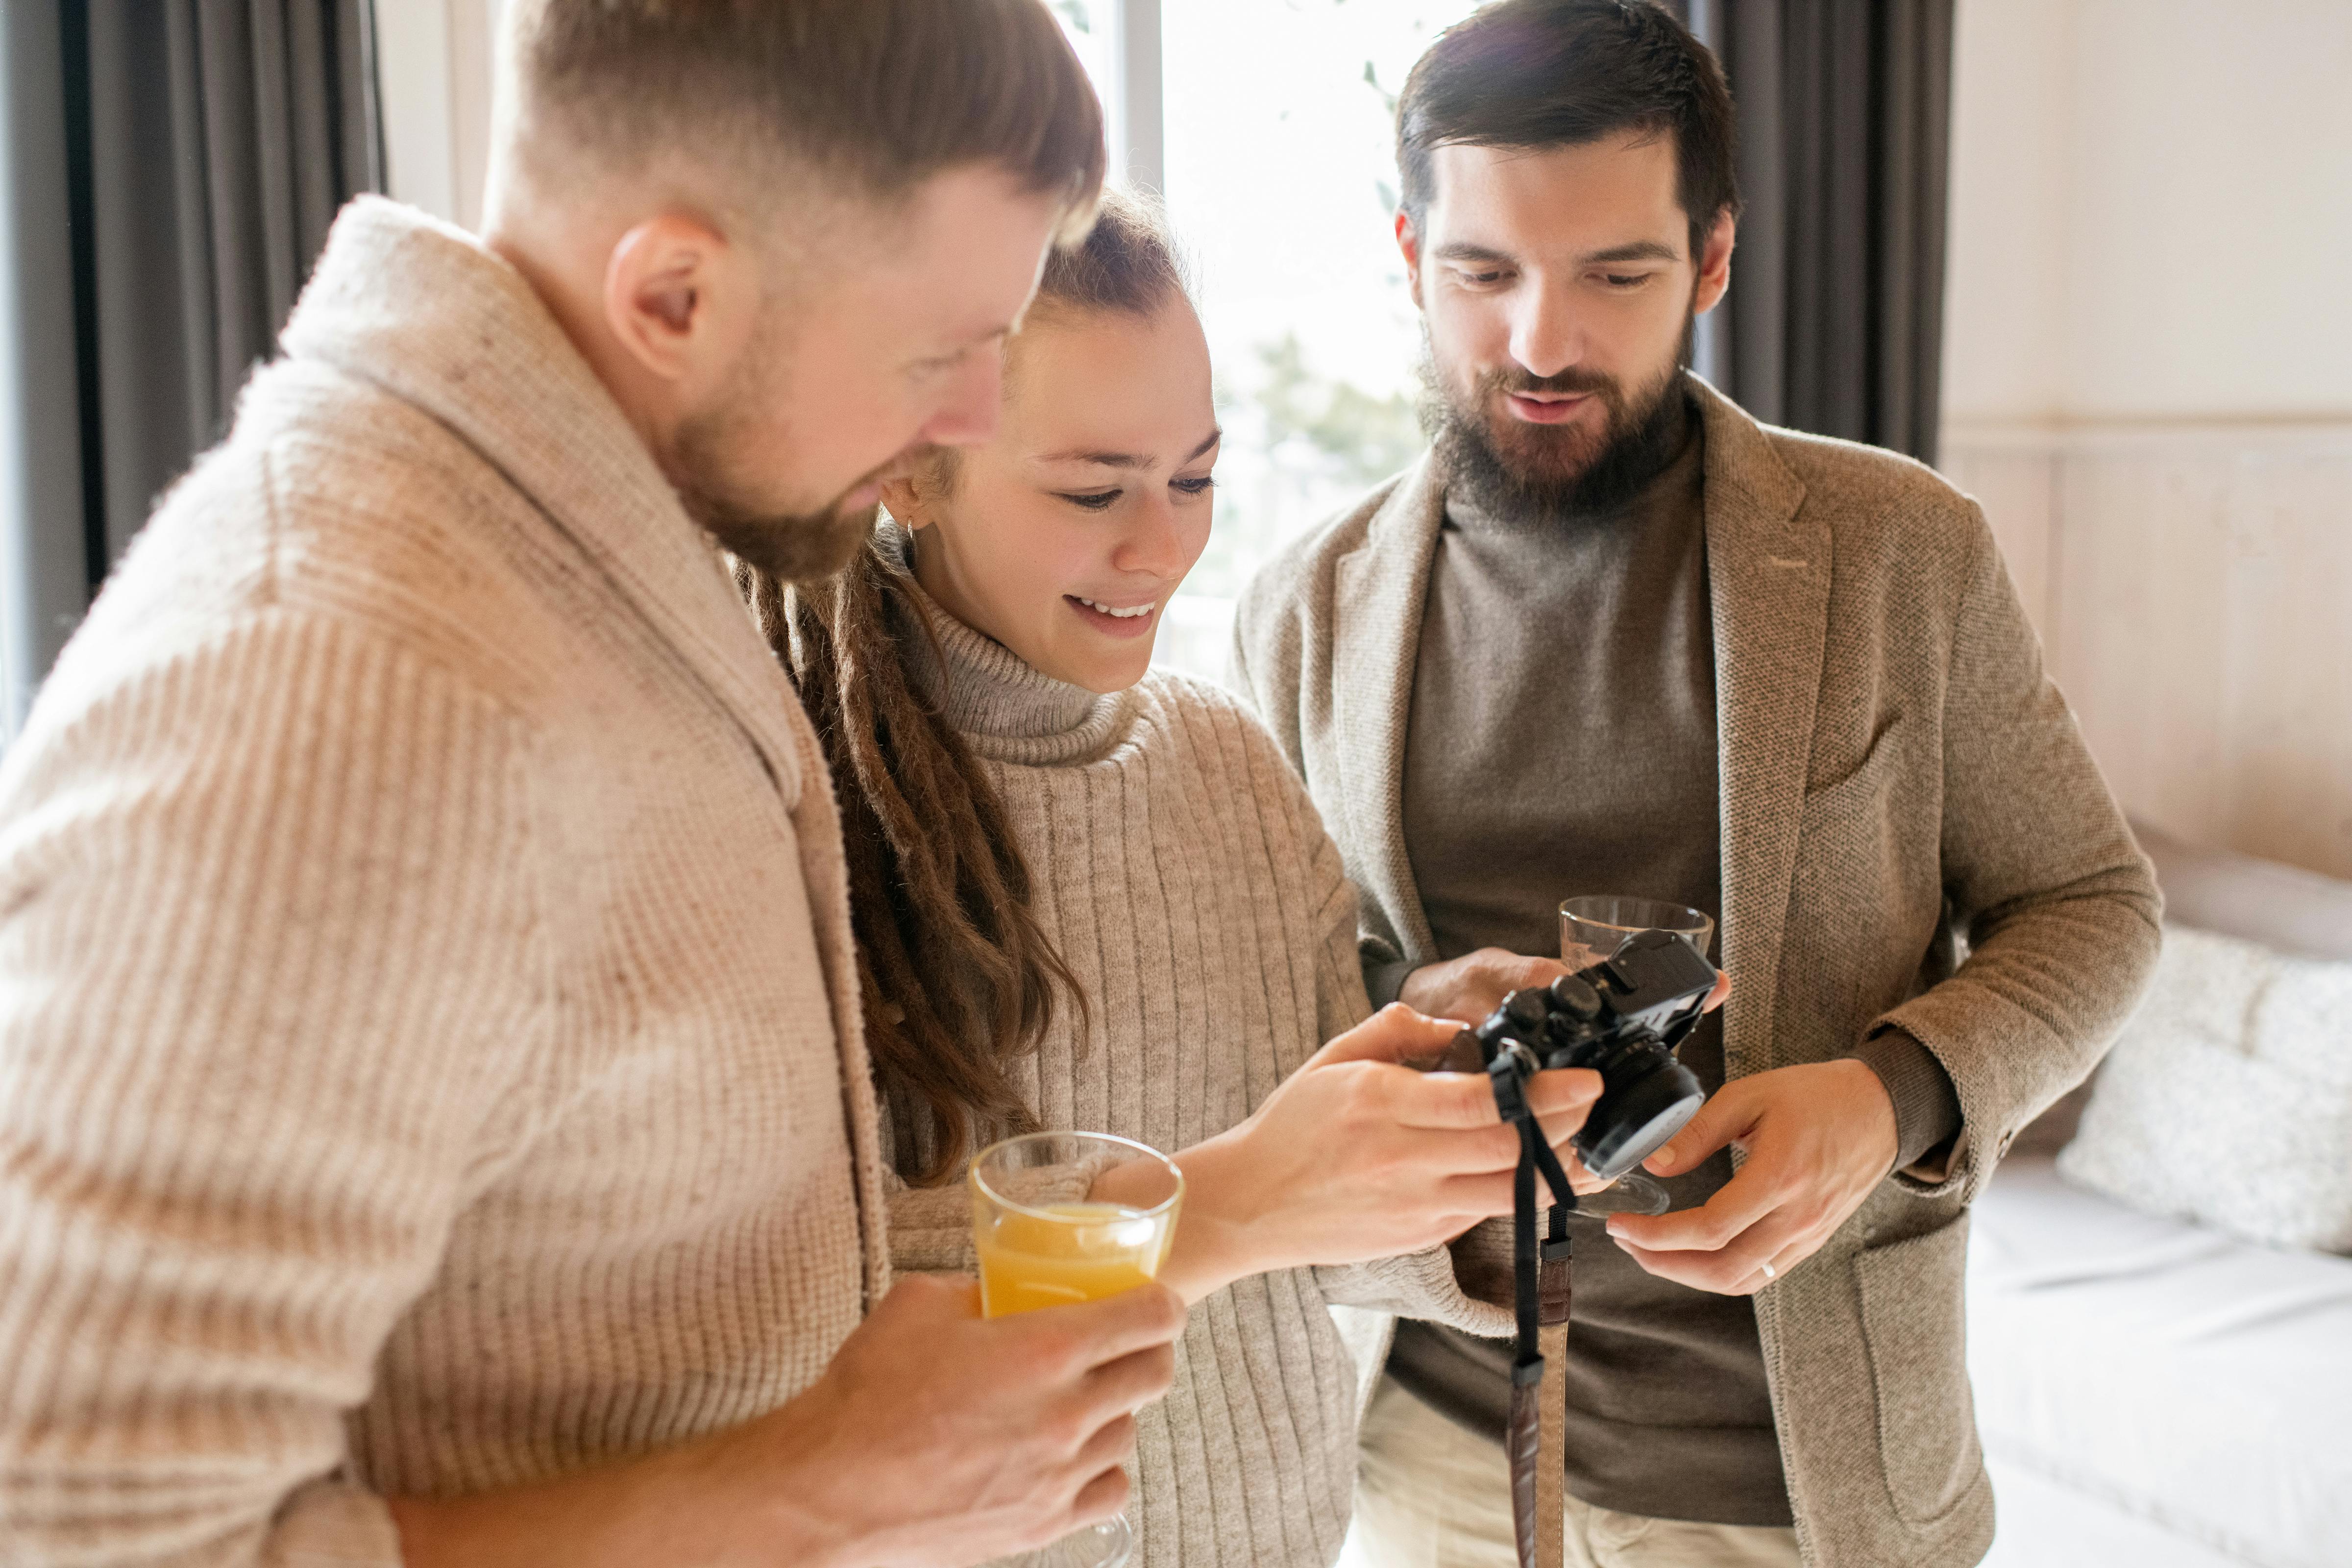 A photo of three people looking at a camera | Source: Pexels